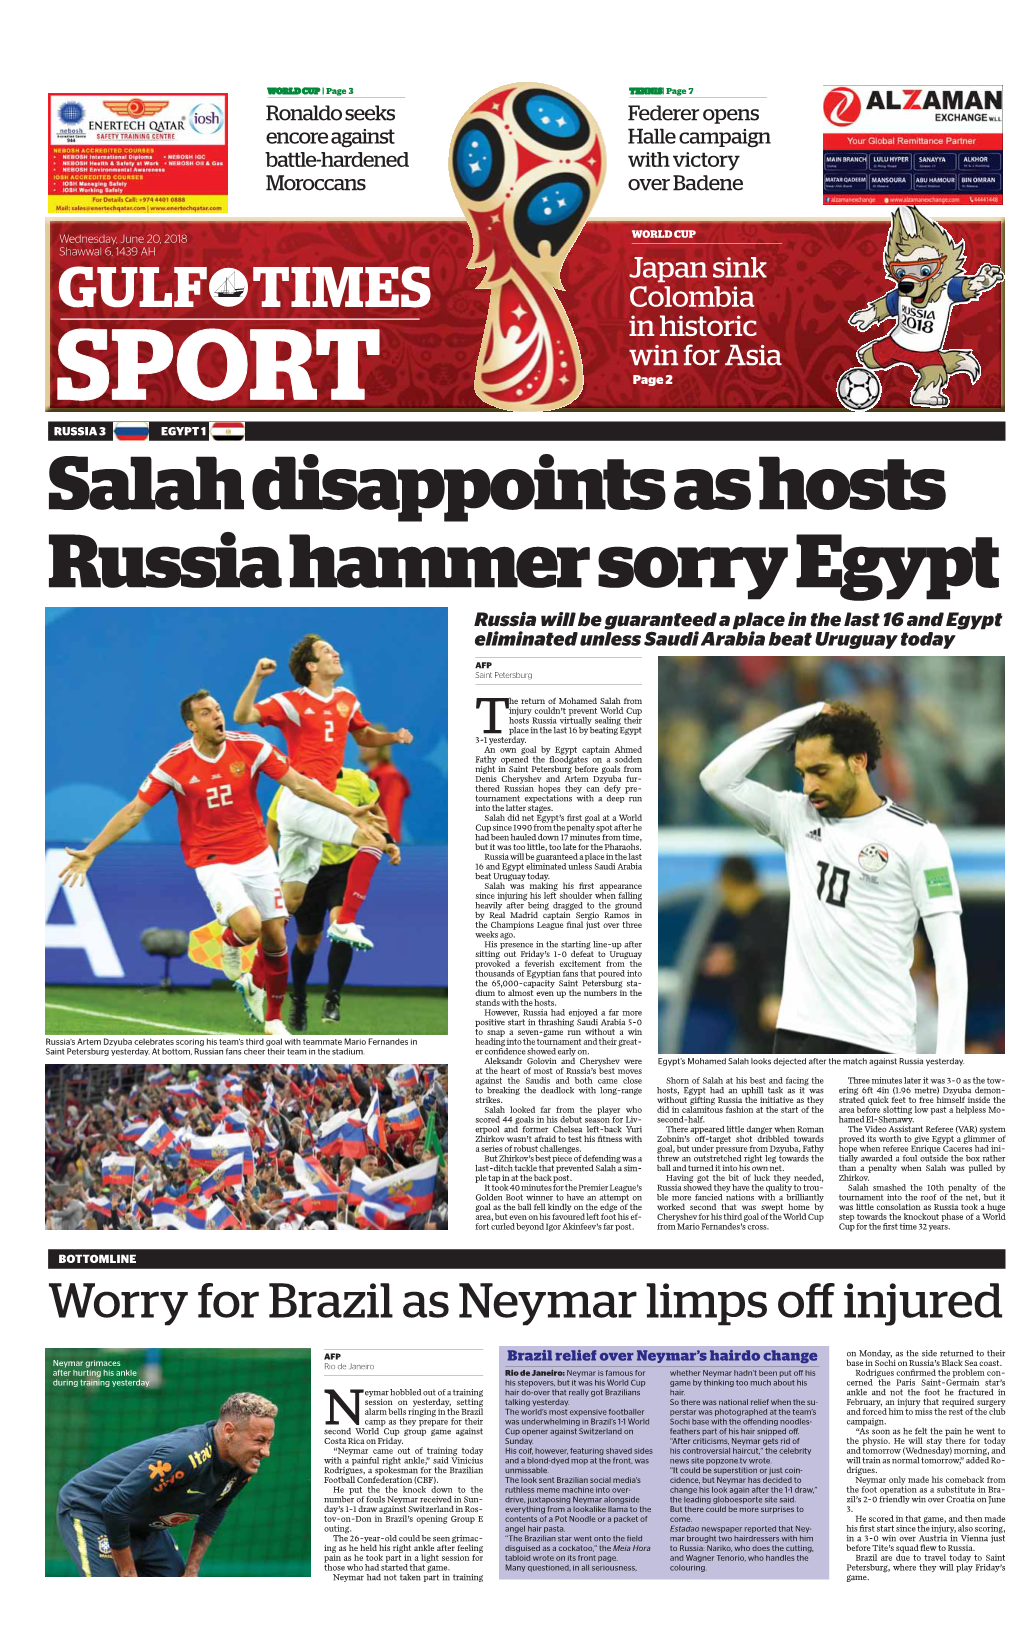 Salah Disappoints As Hosts Russia Hammer Sorry Egypt Russia Will Be Guaranteed a Place in the Last 16 and Egypt Eliminated Unless Saudi Arabia Beat Uruguay Today